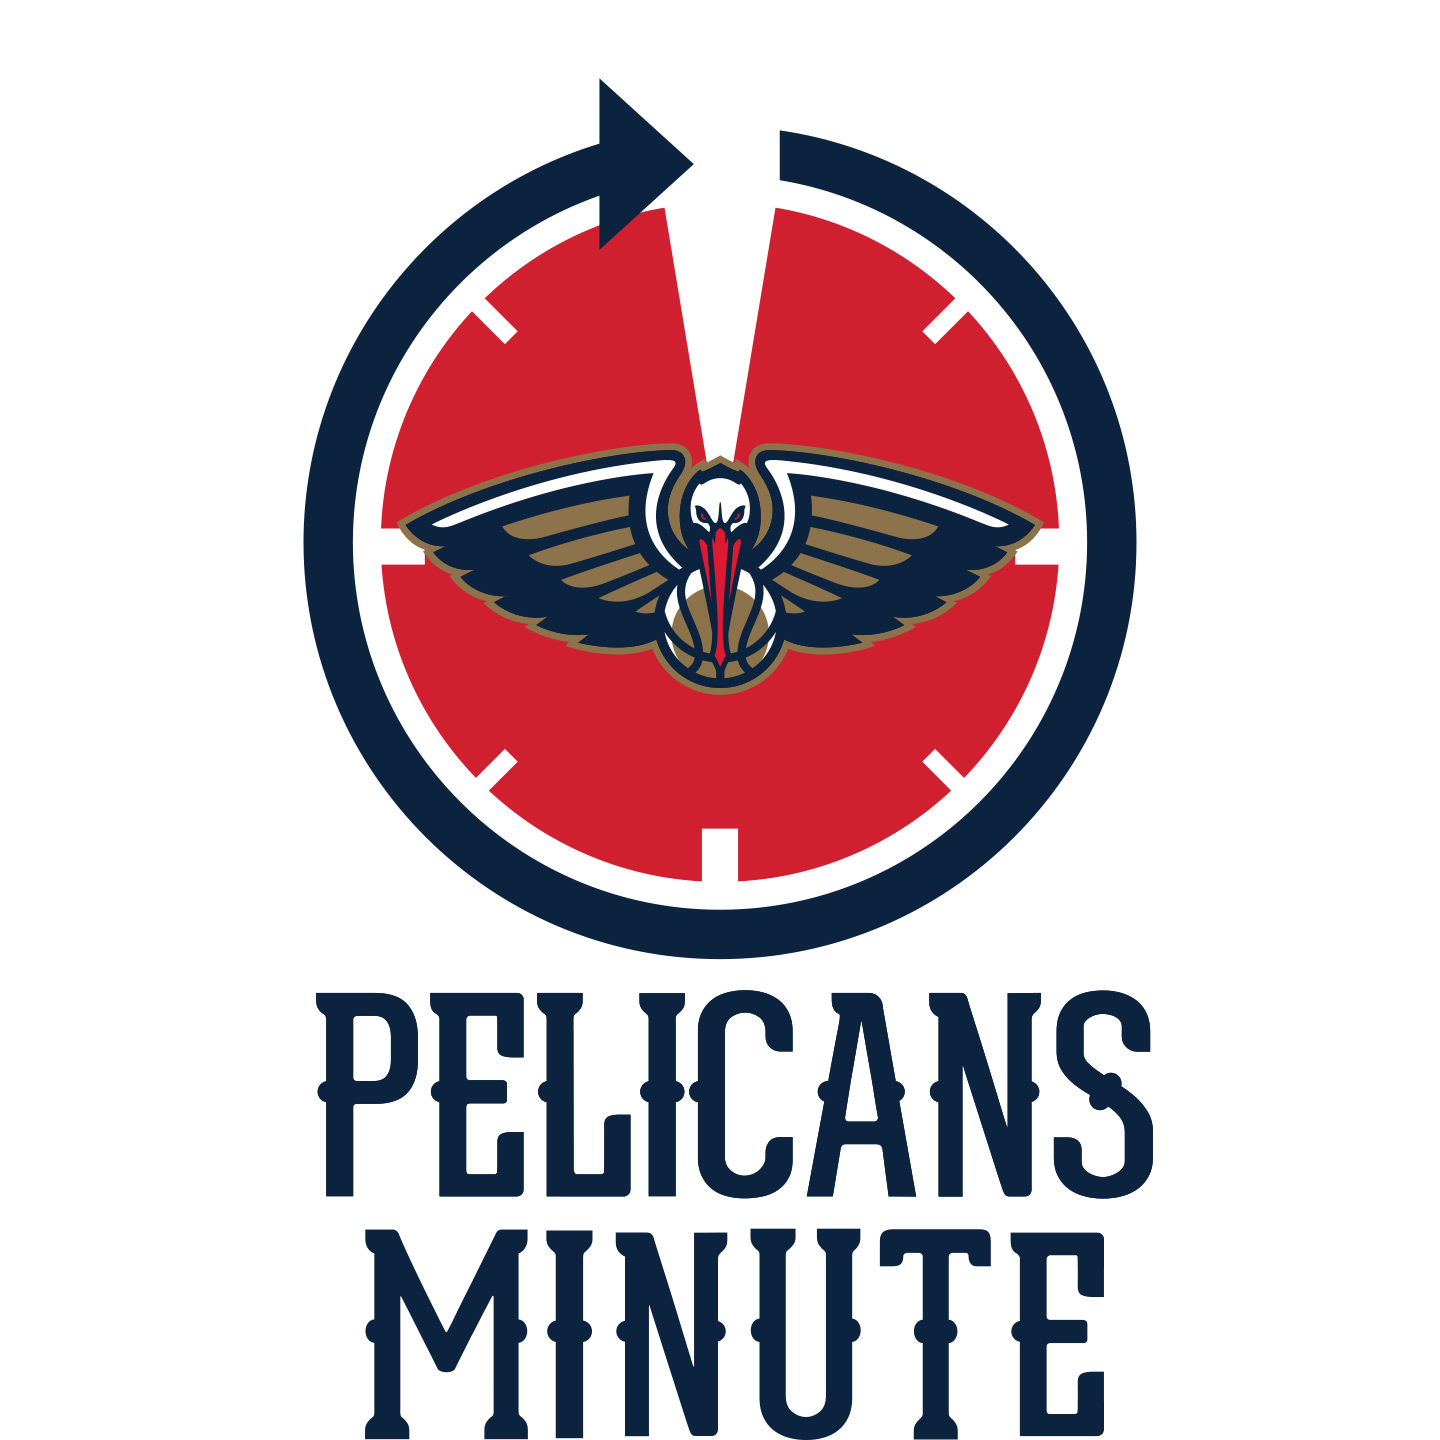 Andrew Schlecht on the New Orleans Pelicans presented by SeatGeek - November 10, 2021